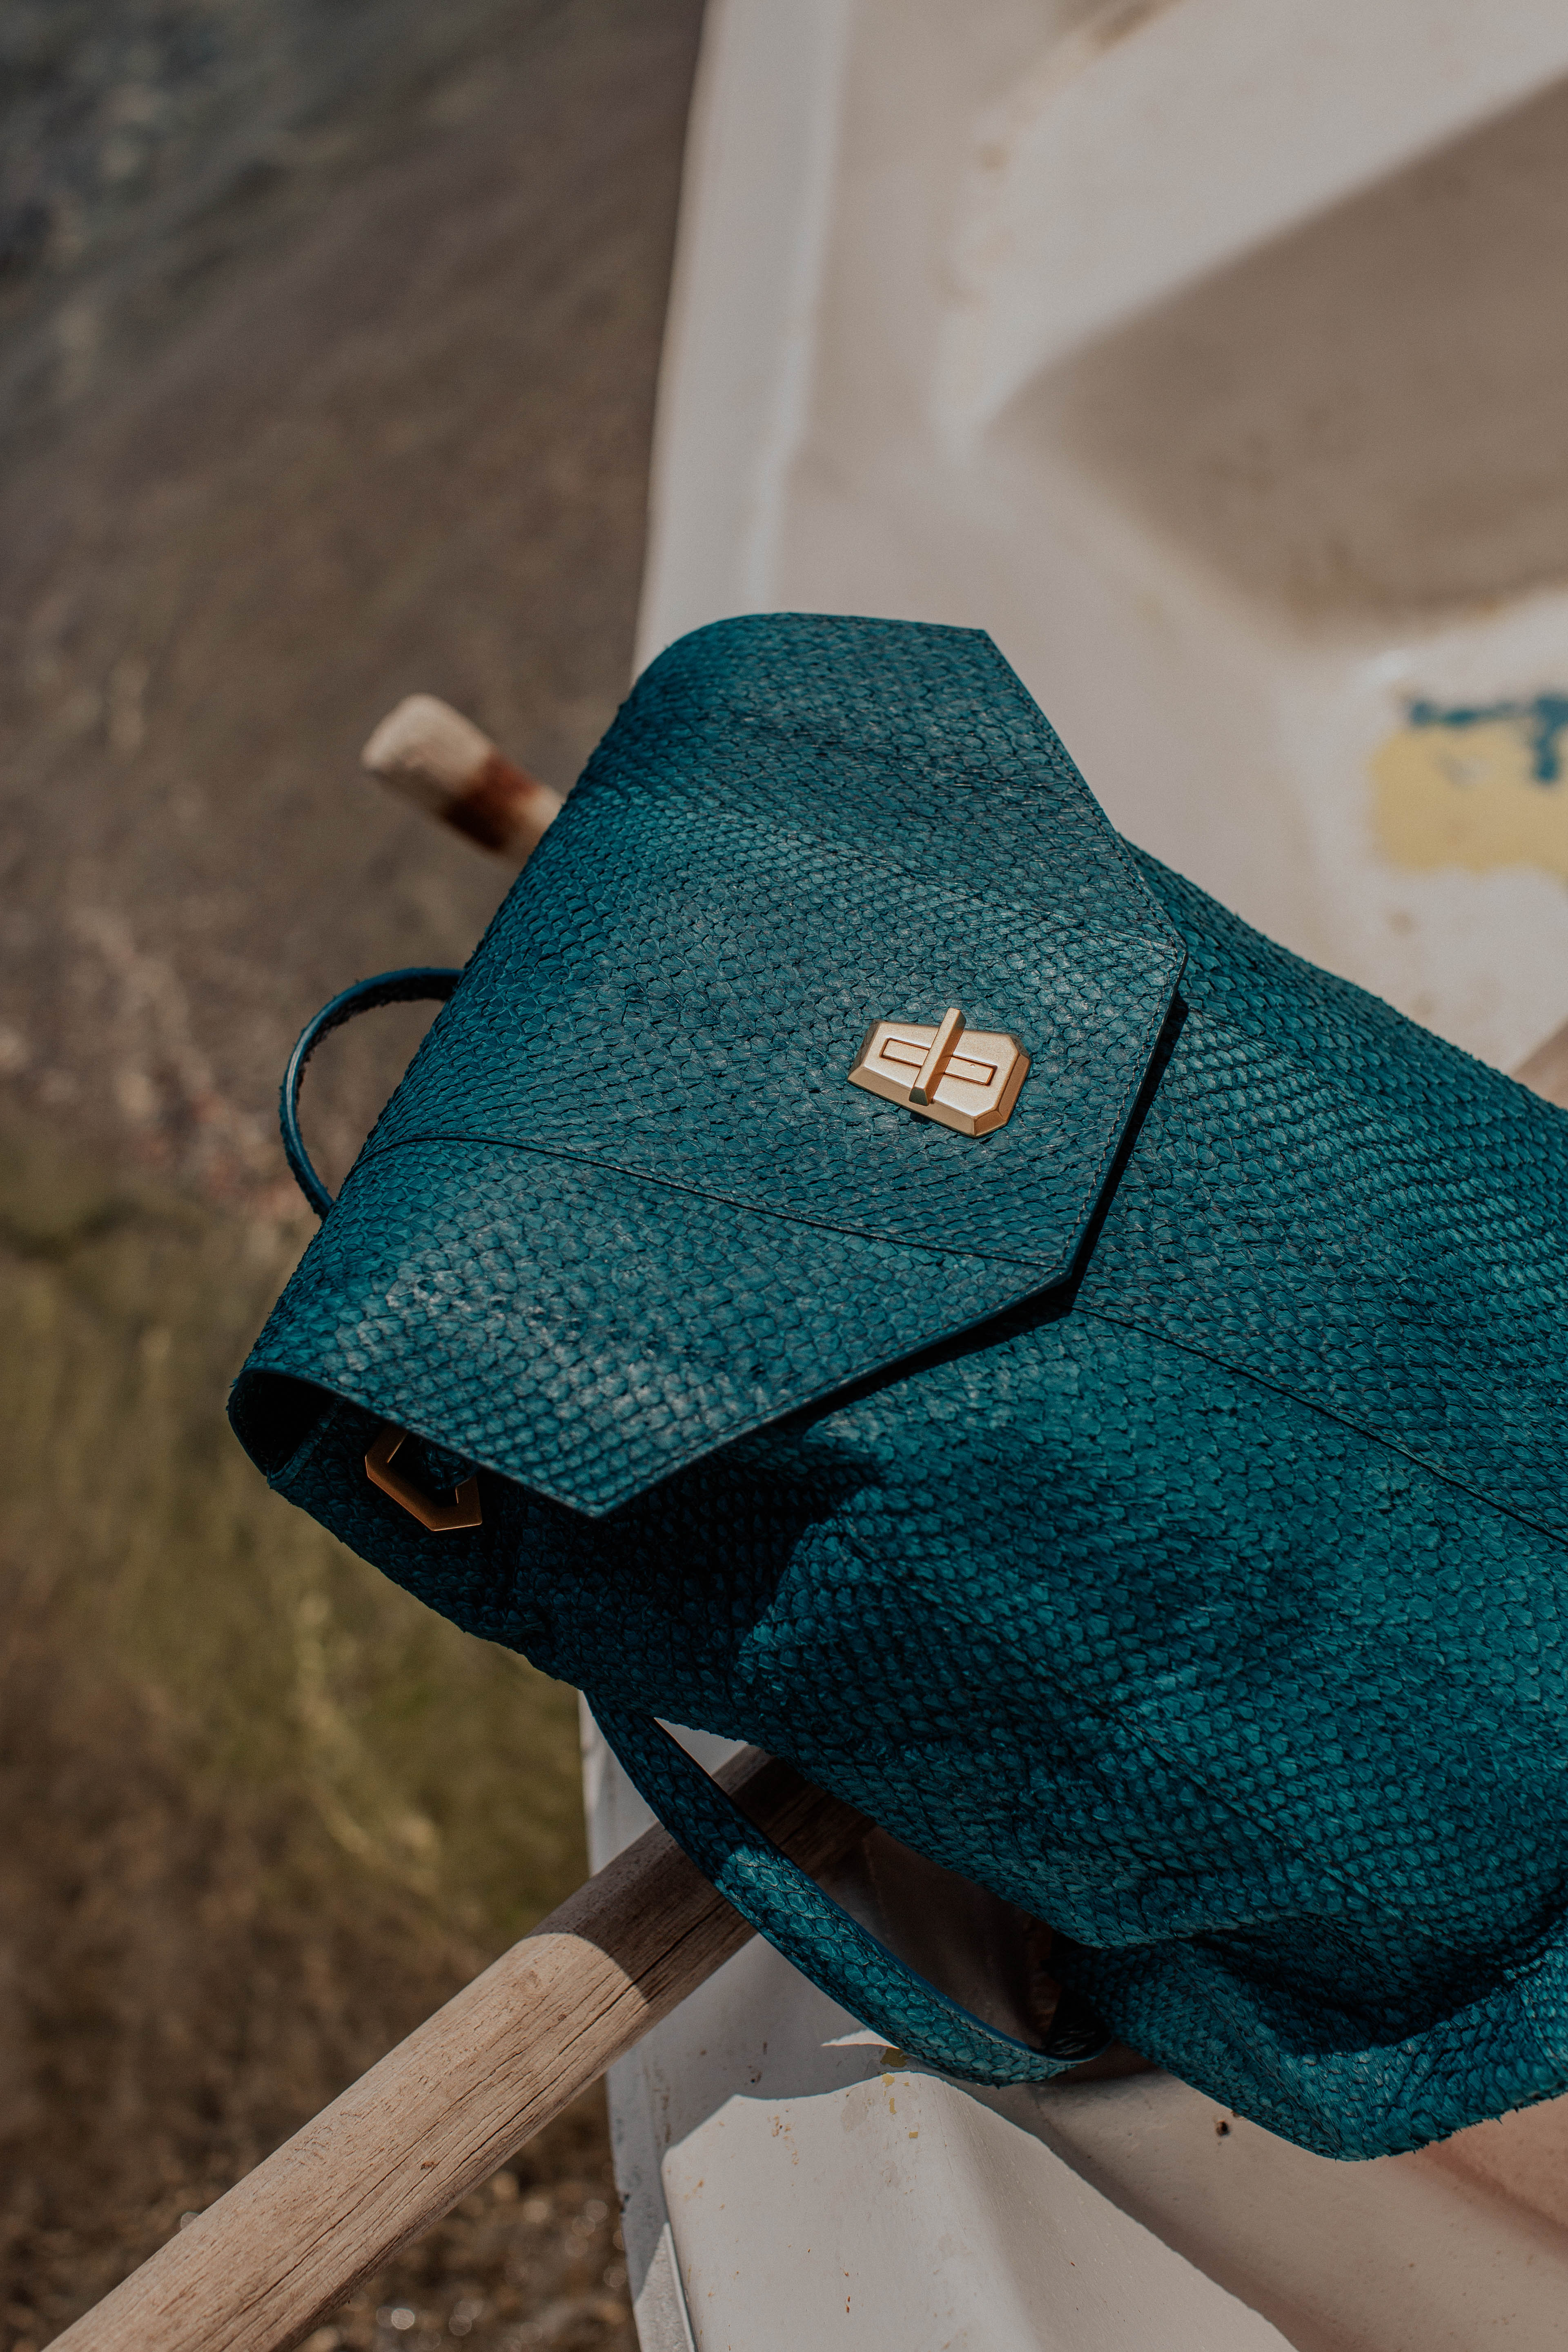 Designer Spotlight on the sustainable accessory brand aitch aitch on NoMad Luxuries